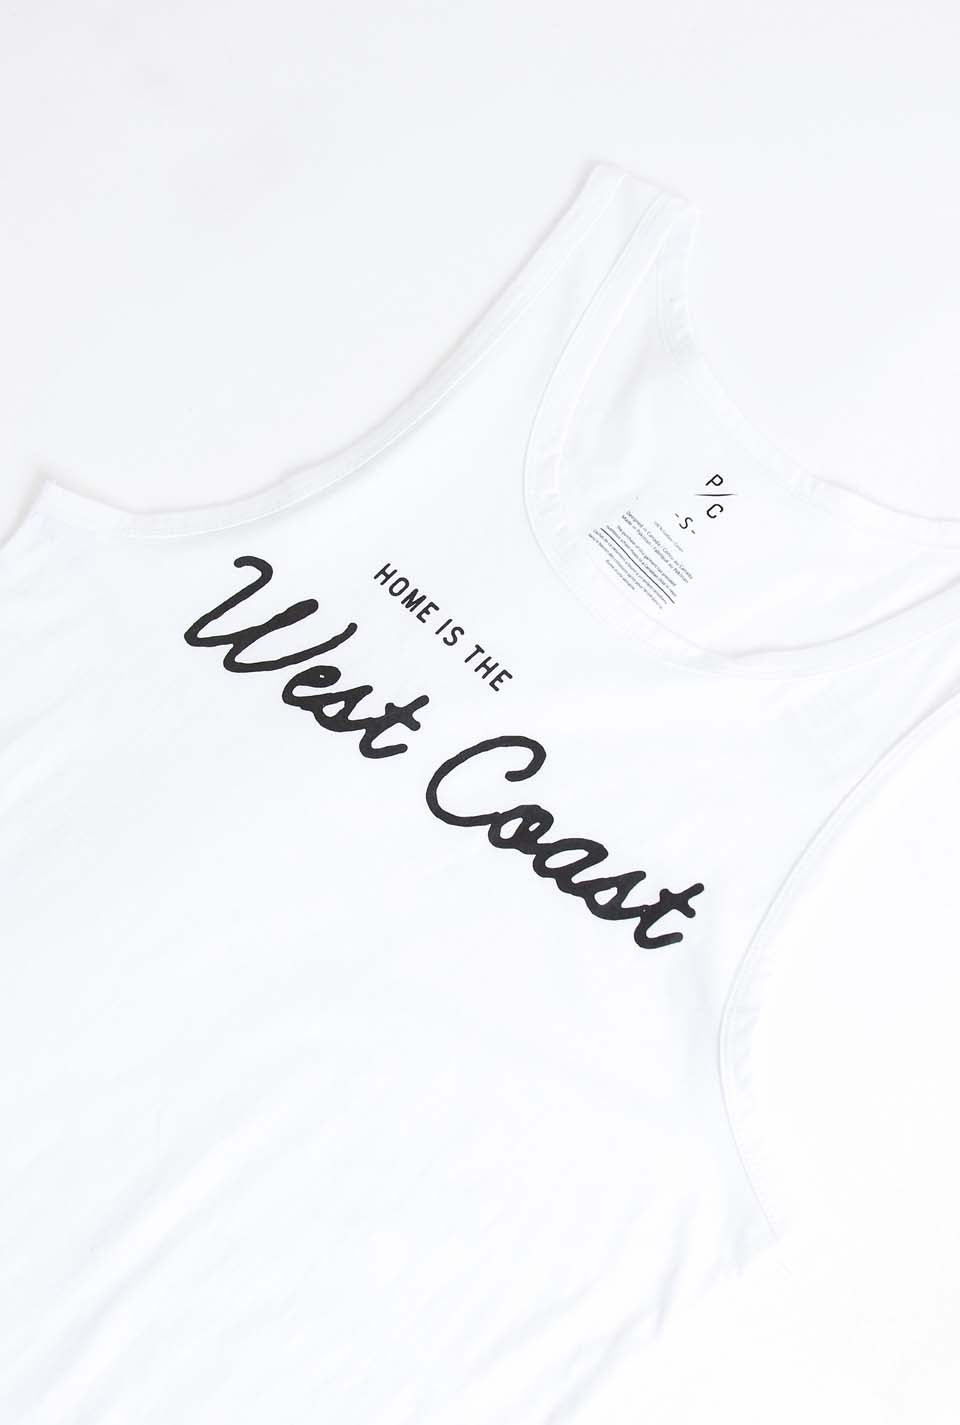 Home is the West Coast Tank - White